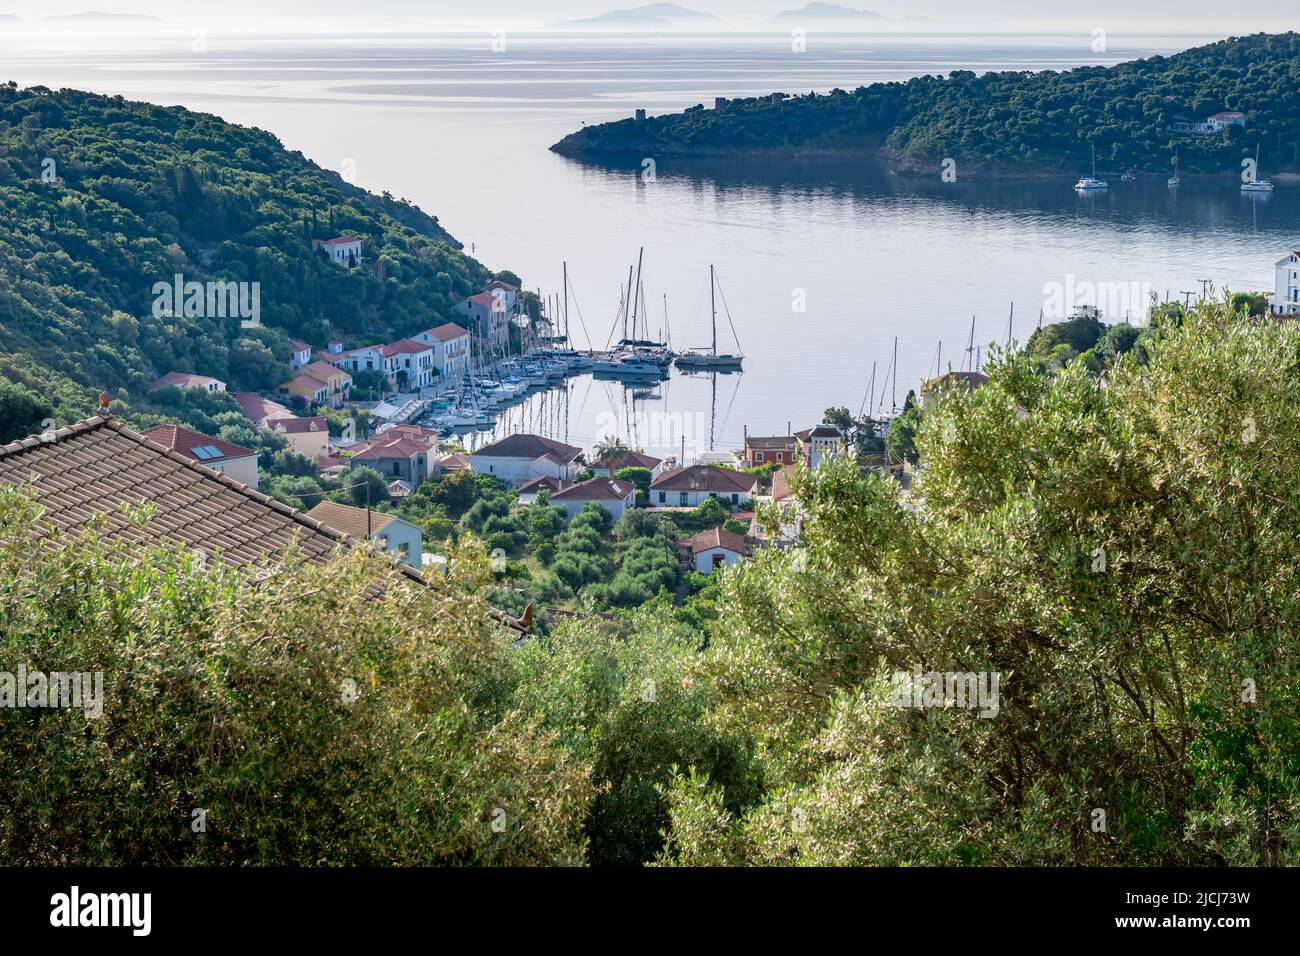 An overview of Kioni, a beautiful seaside village, holiday resort on Ithaca Island, Greece. Stock Photo